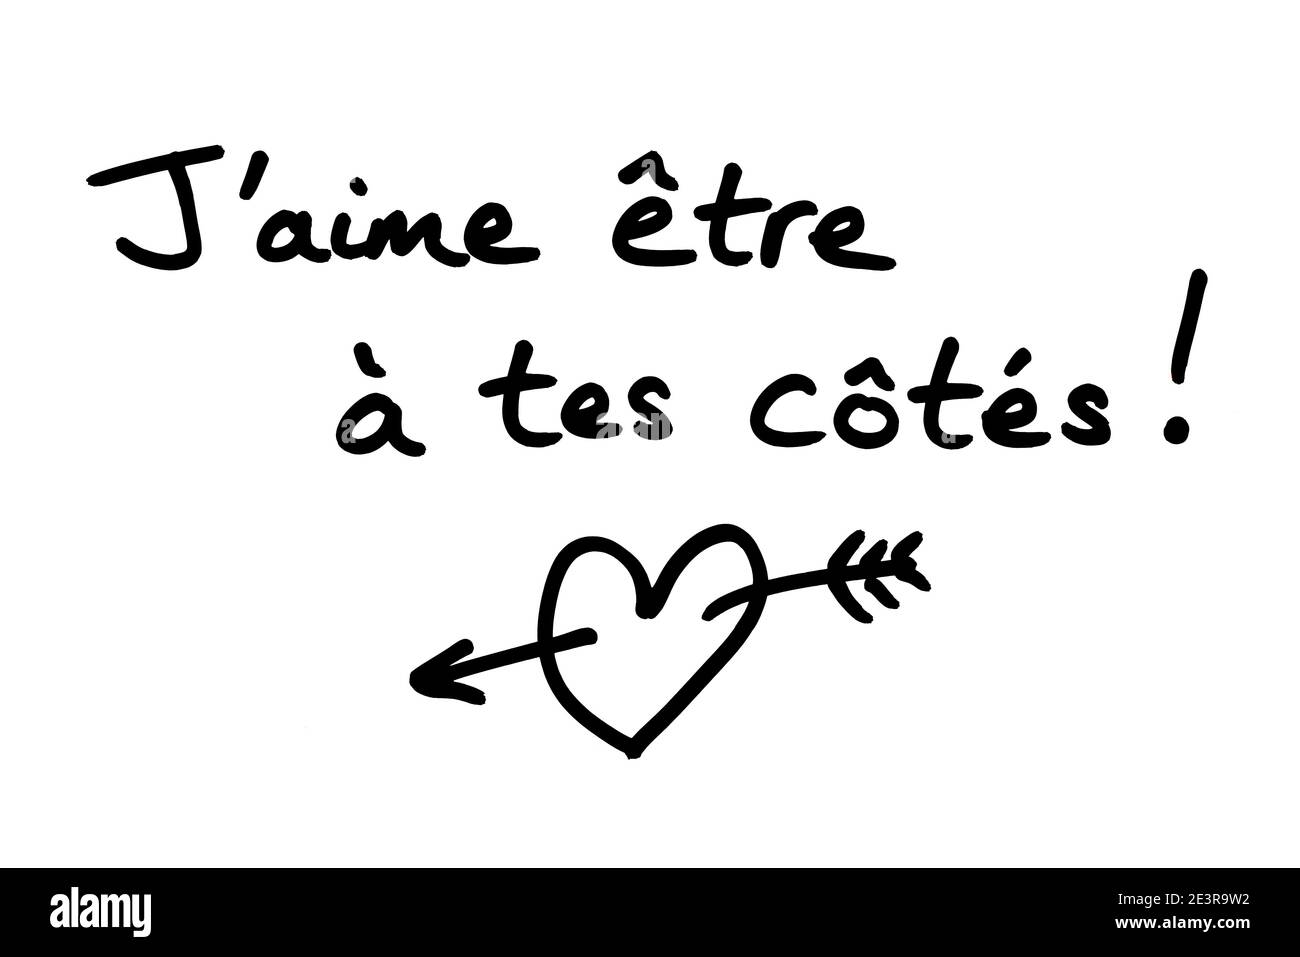 Jaime etre a tes cotes! - meaning I Love being By Your Side, in the French language, and a heart illustration, handwritten on a white background. Stock Photo